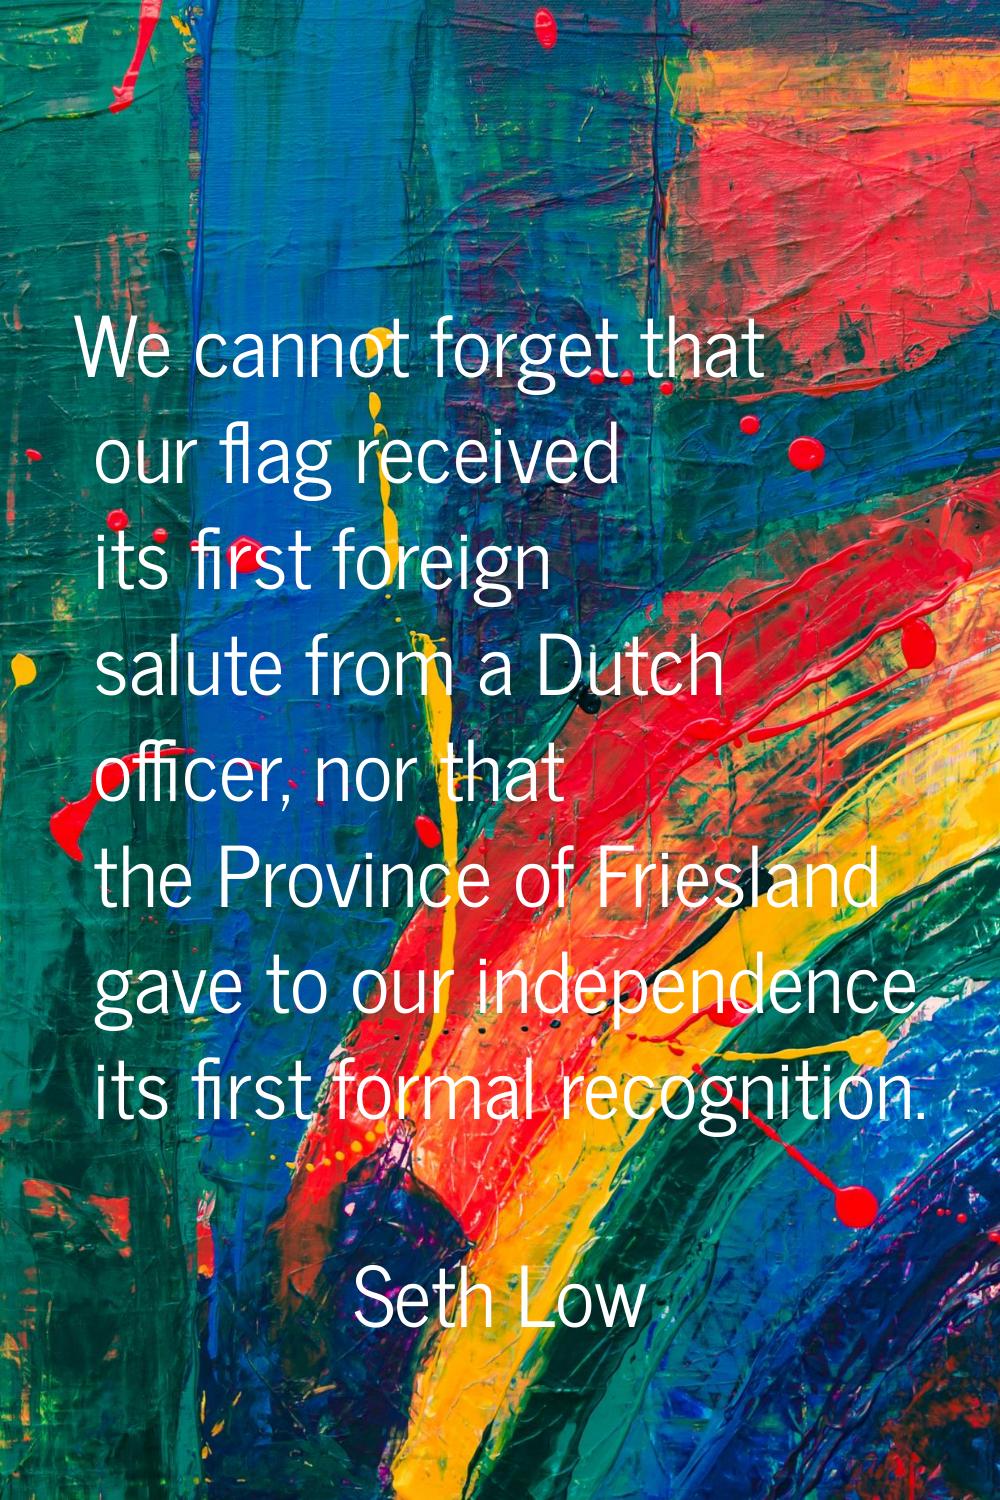 We cannot forget that our flag received its first foreign salute from a Dutch officer, nor that the